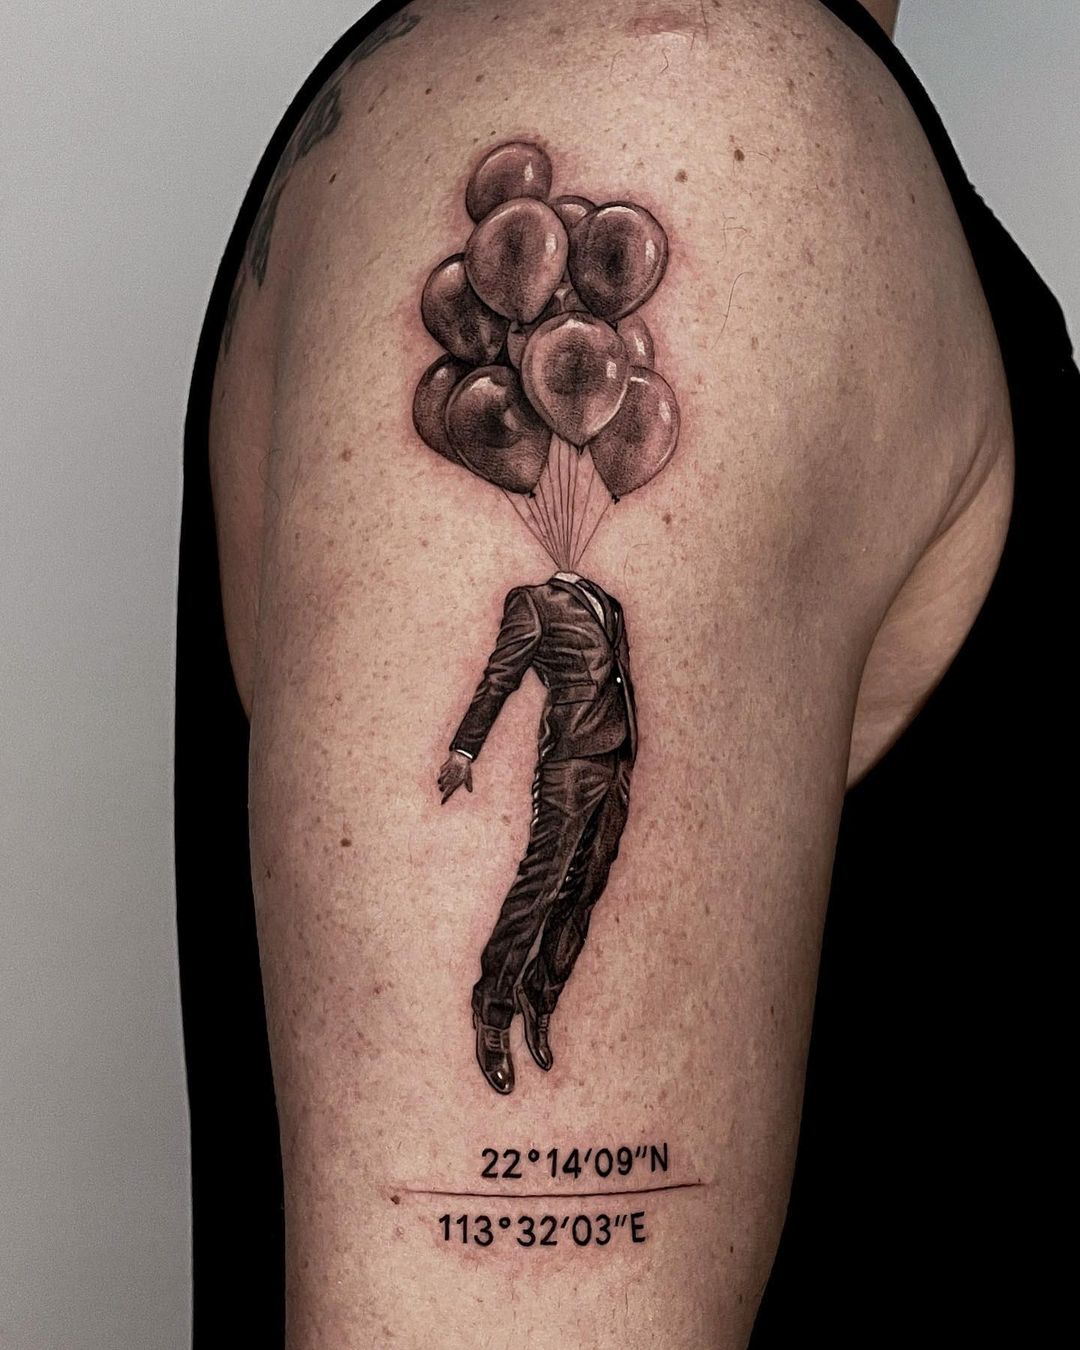 Realistic balloon tattoos by ink.yan